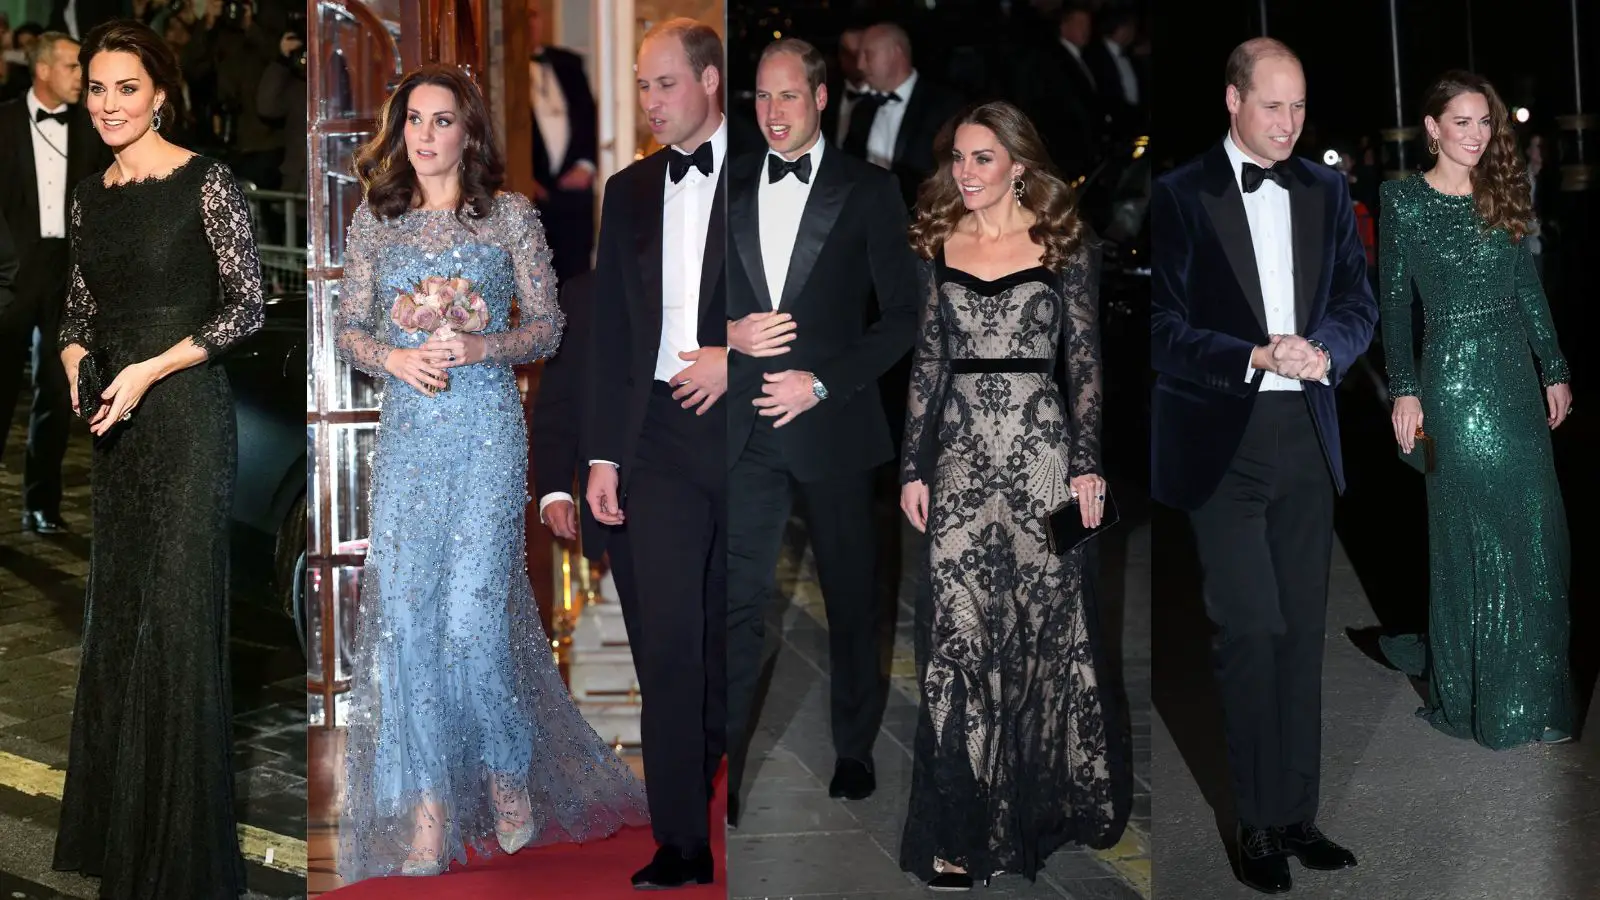 The Prince and Princess of Wales are made their first appearance at the Royal ariety Performance in 2014